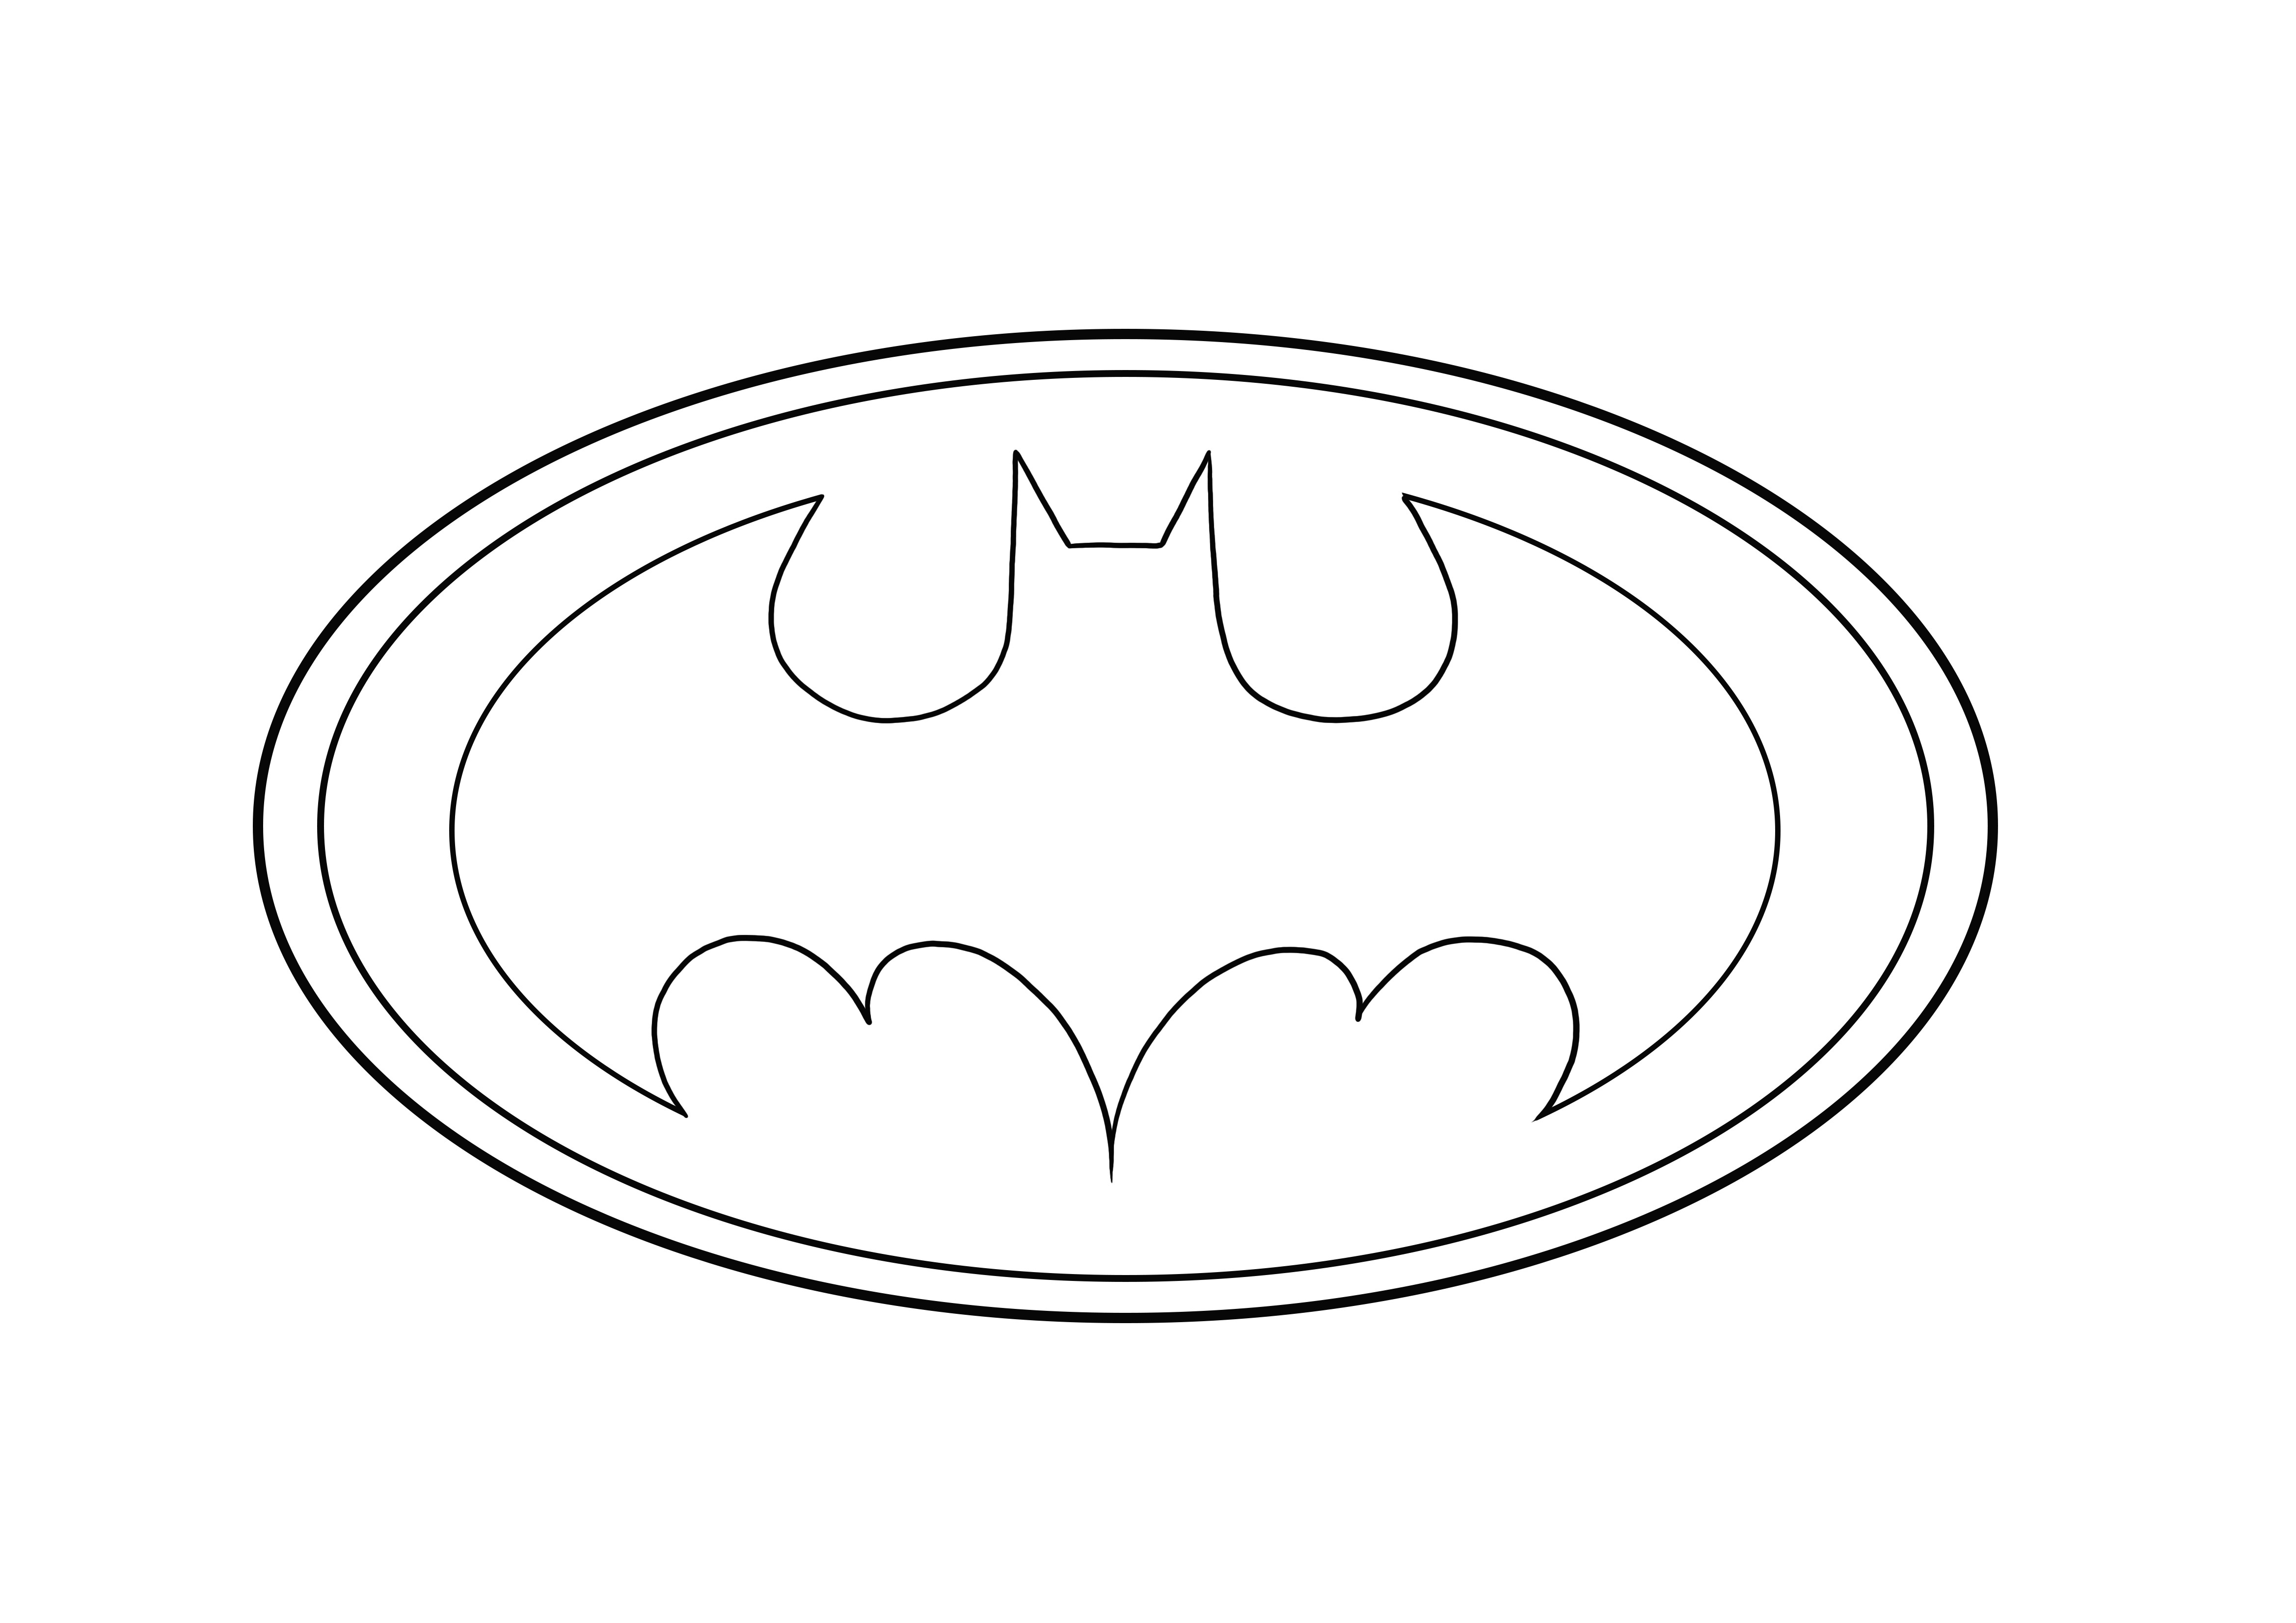 The Batman Logo is ready to be downloaded and colored for free